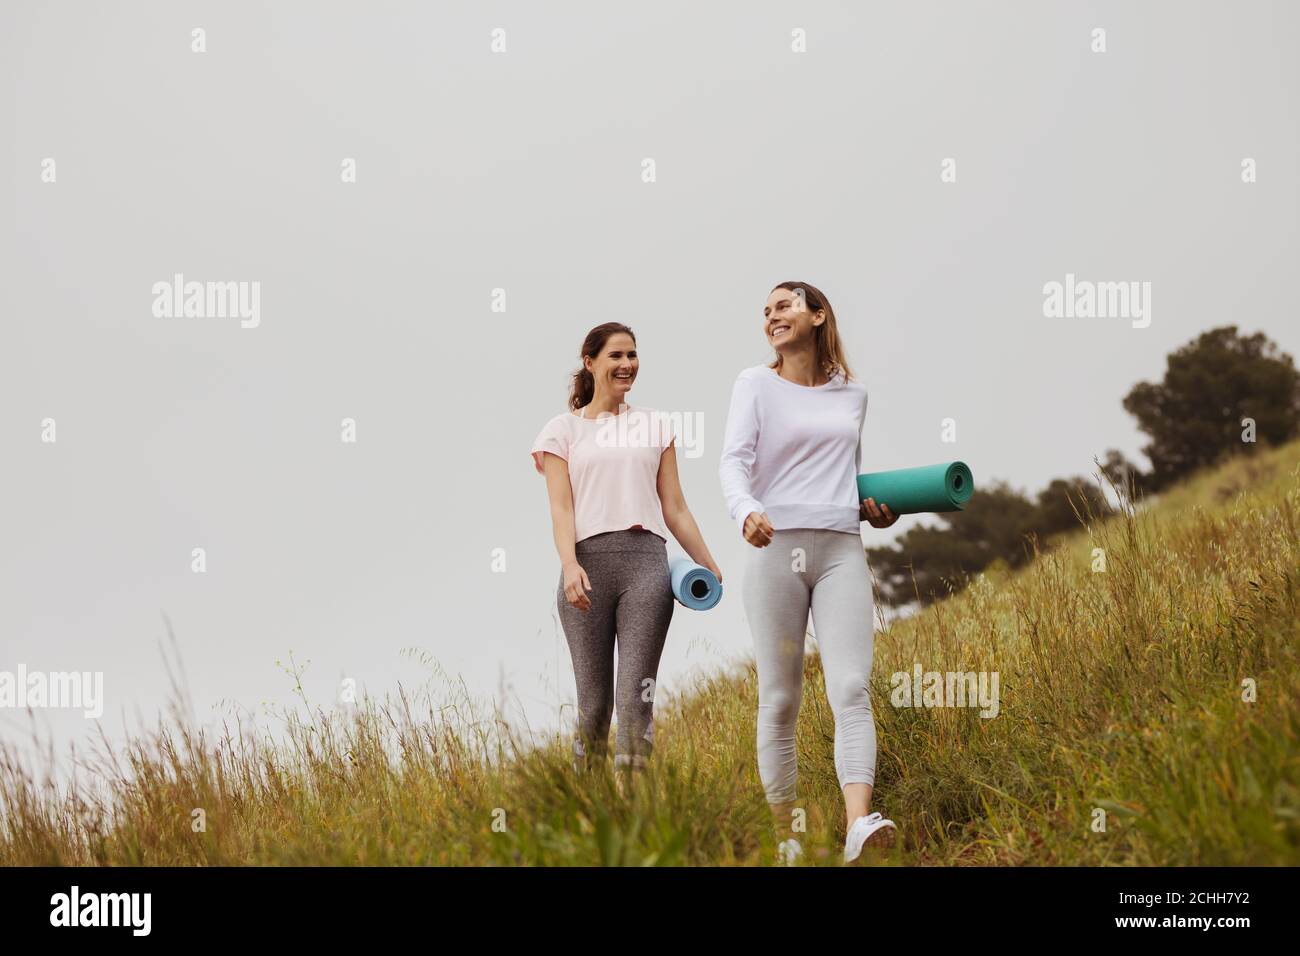 Two cheerful women friends walking with yoga mats in the countryside. Smiling women going for workout in the morning. Stock Photo